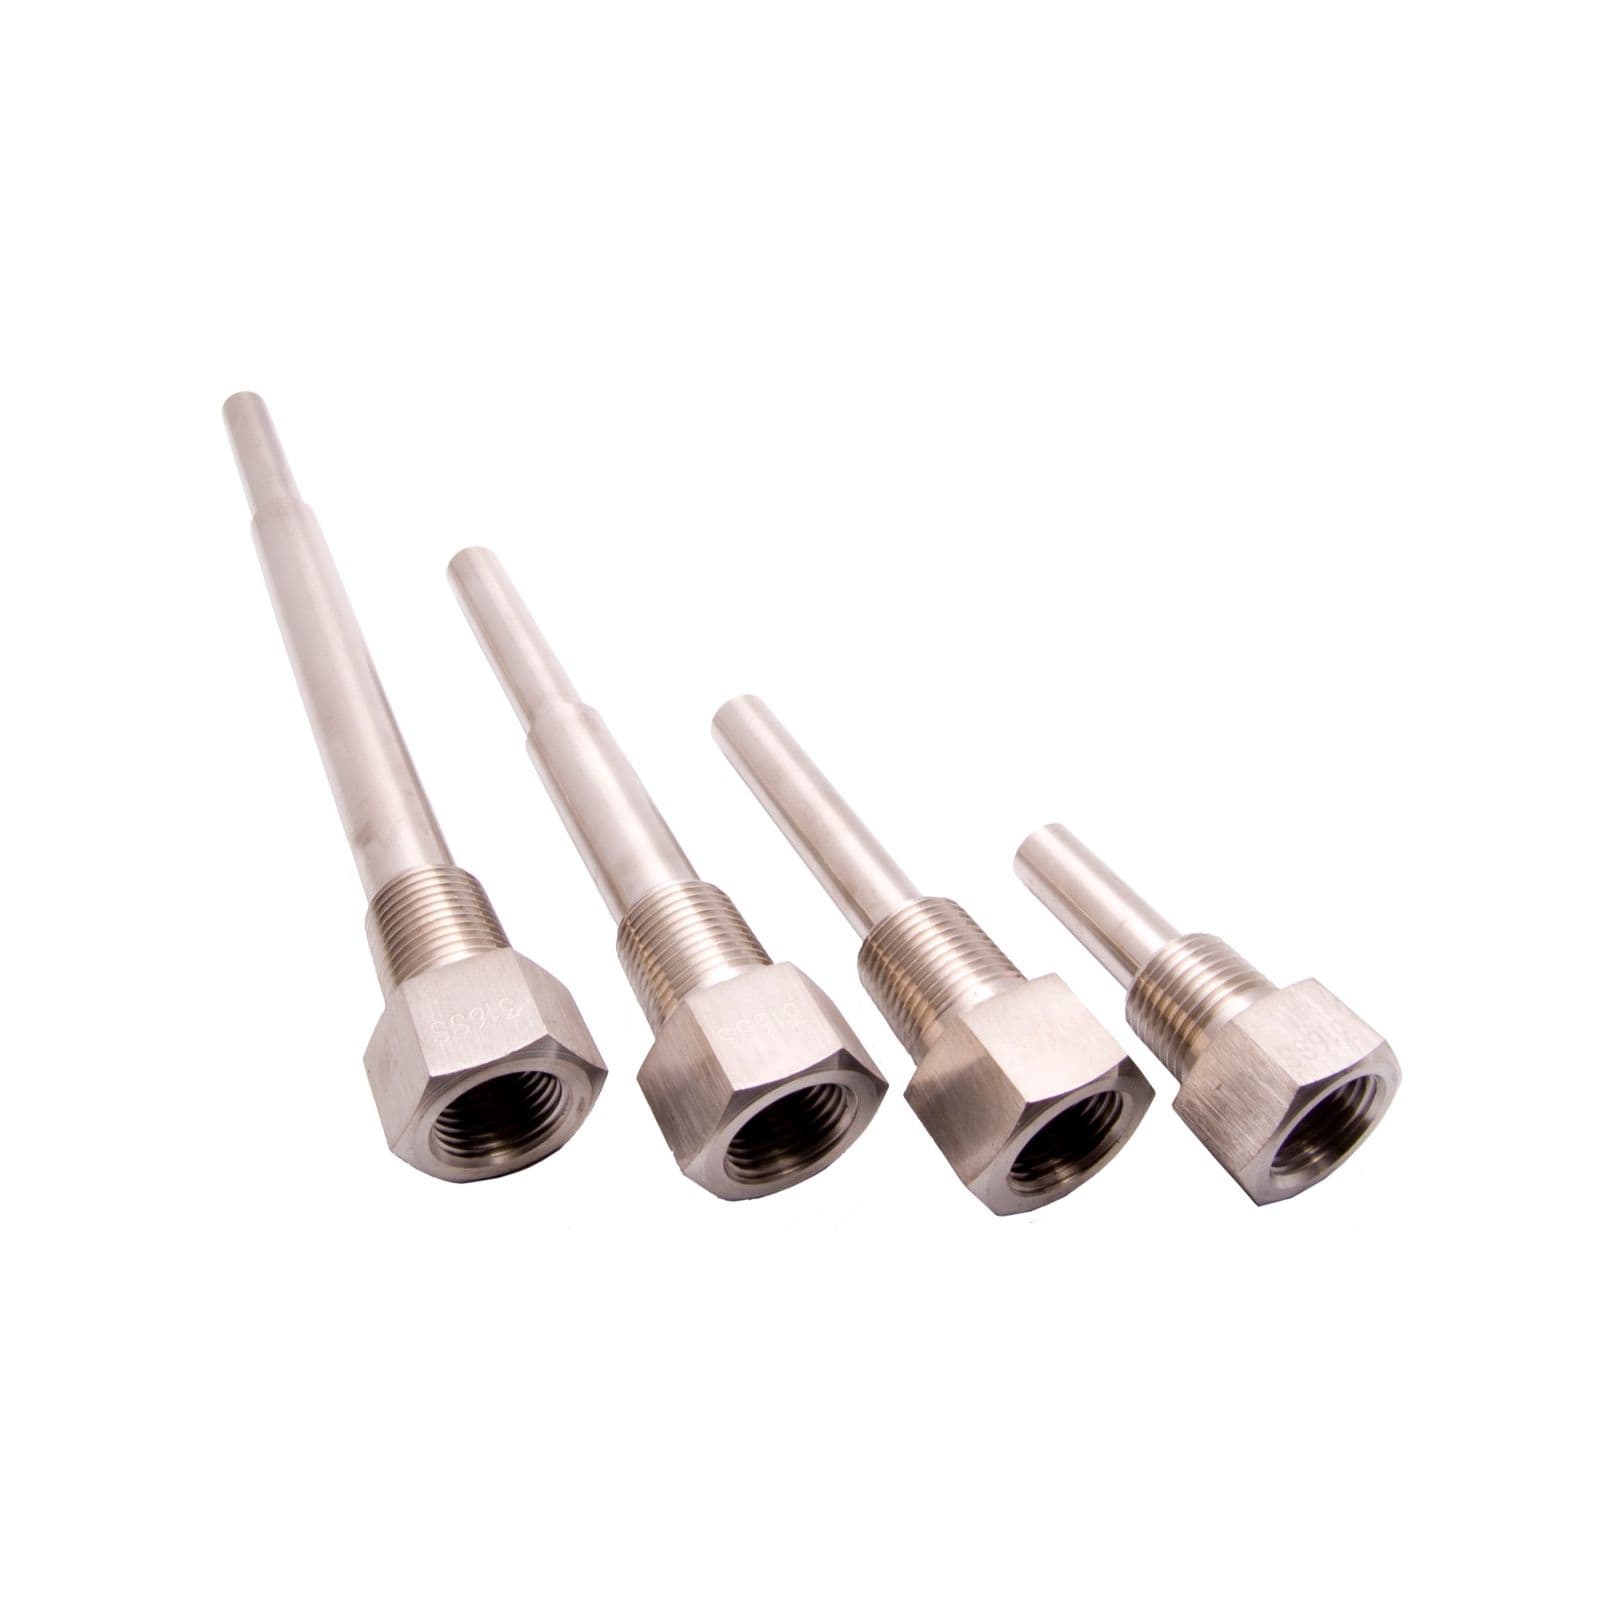 4.5 U Dimension 3/4 NPT Process Connection for Bimetal and Gas Actuated Thermometers WIKA TH2LR045SS 316 Stainless Steel Threaded Thermowell Reduced Shank with Lag 